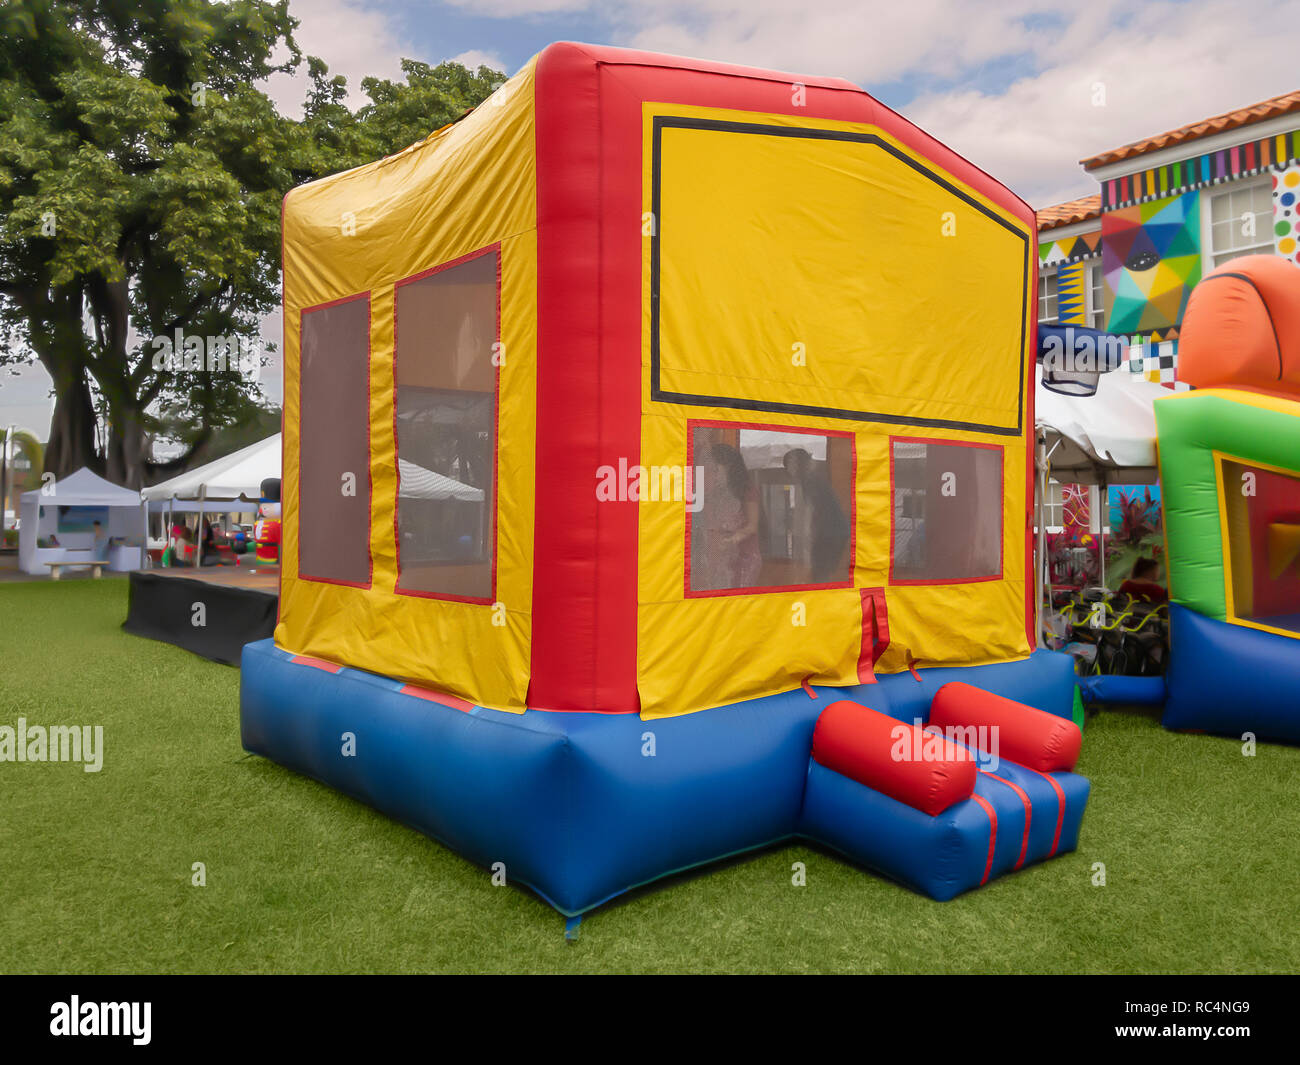 The colorful bounce house on the green grass stands out for all the kids to see and enjoy at the community fair. Stock Photo